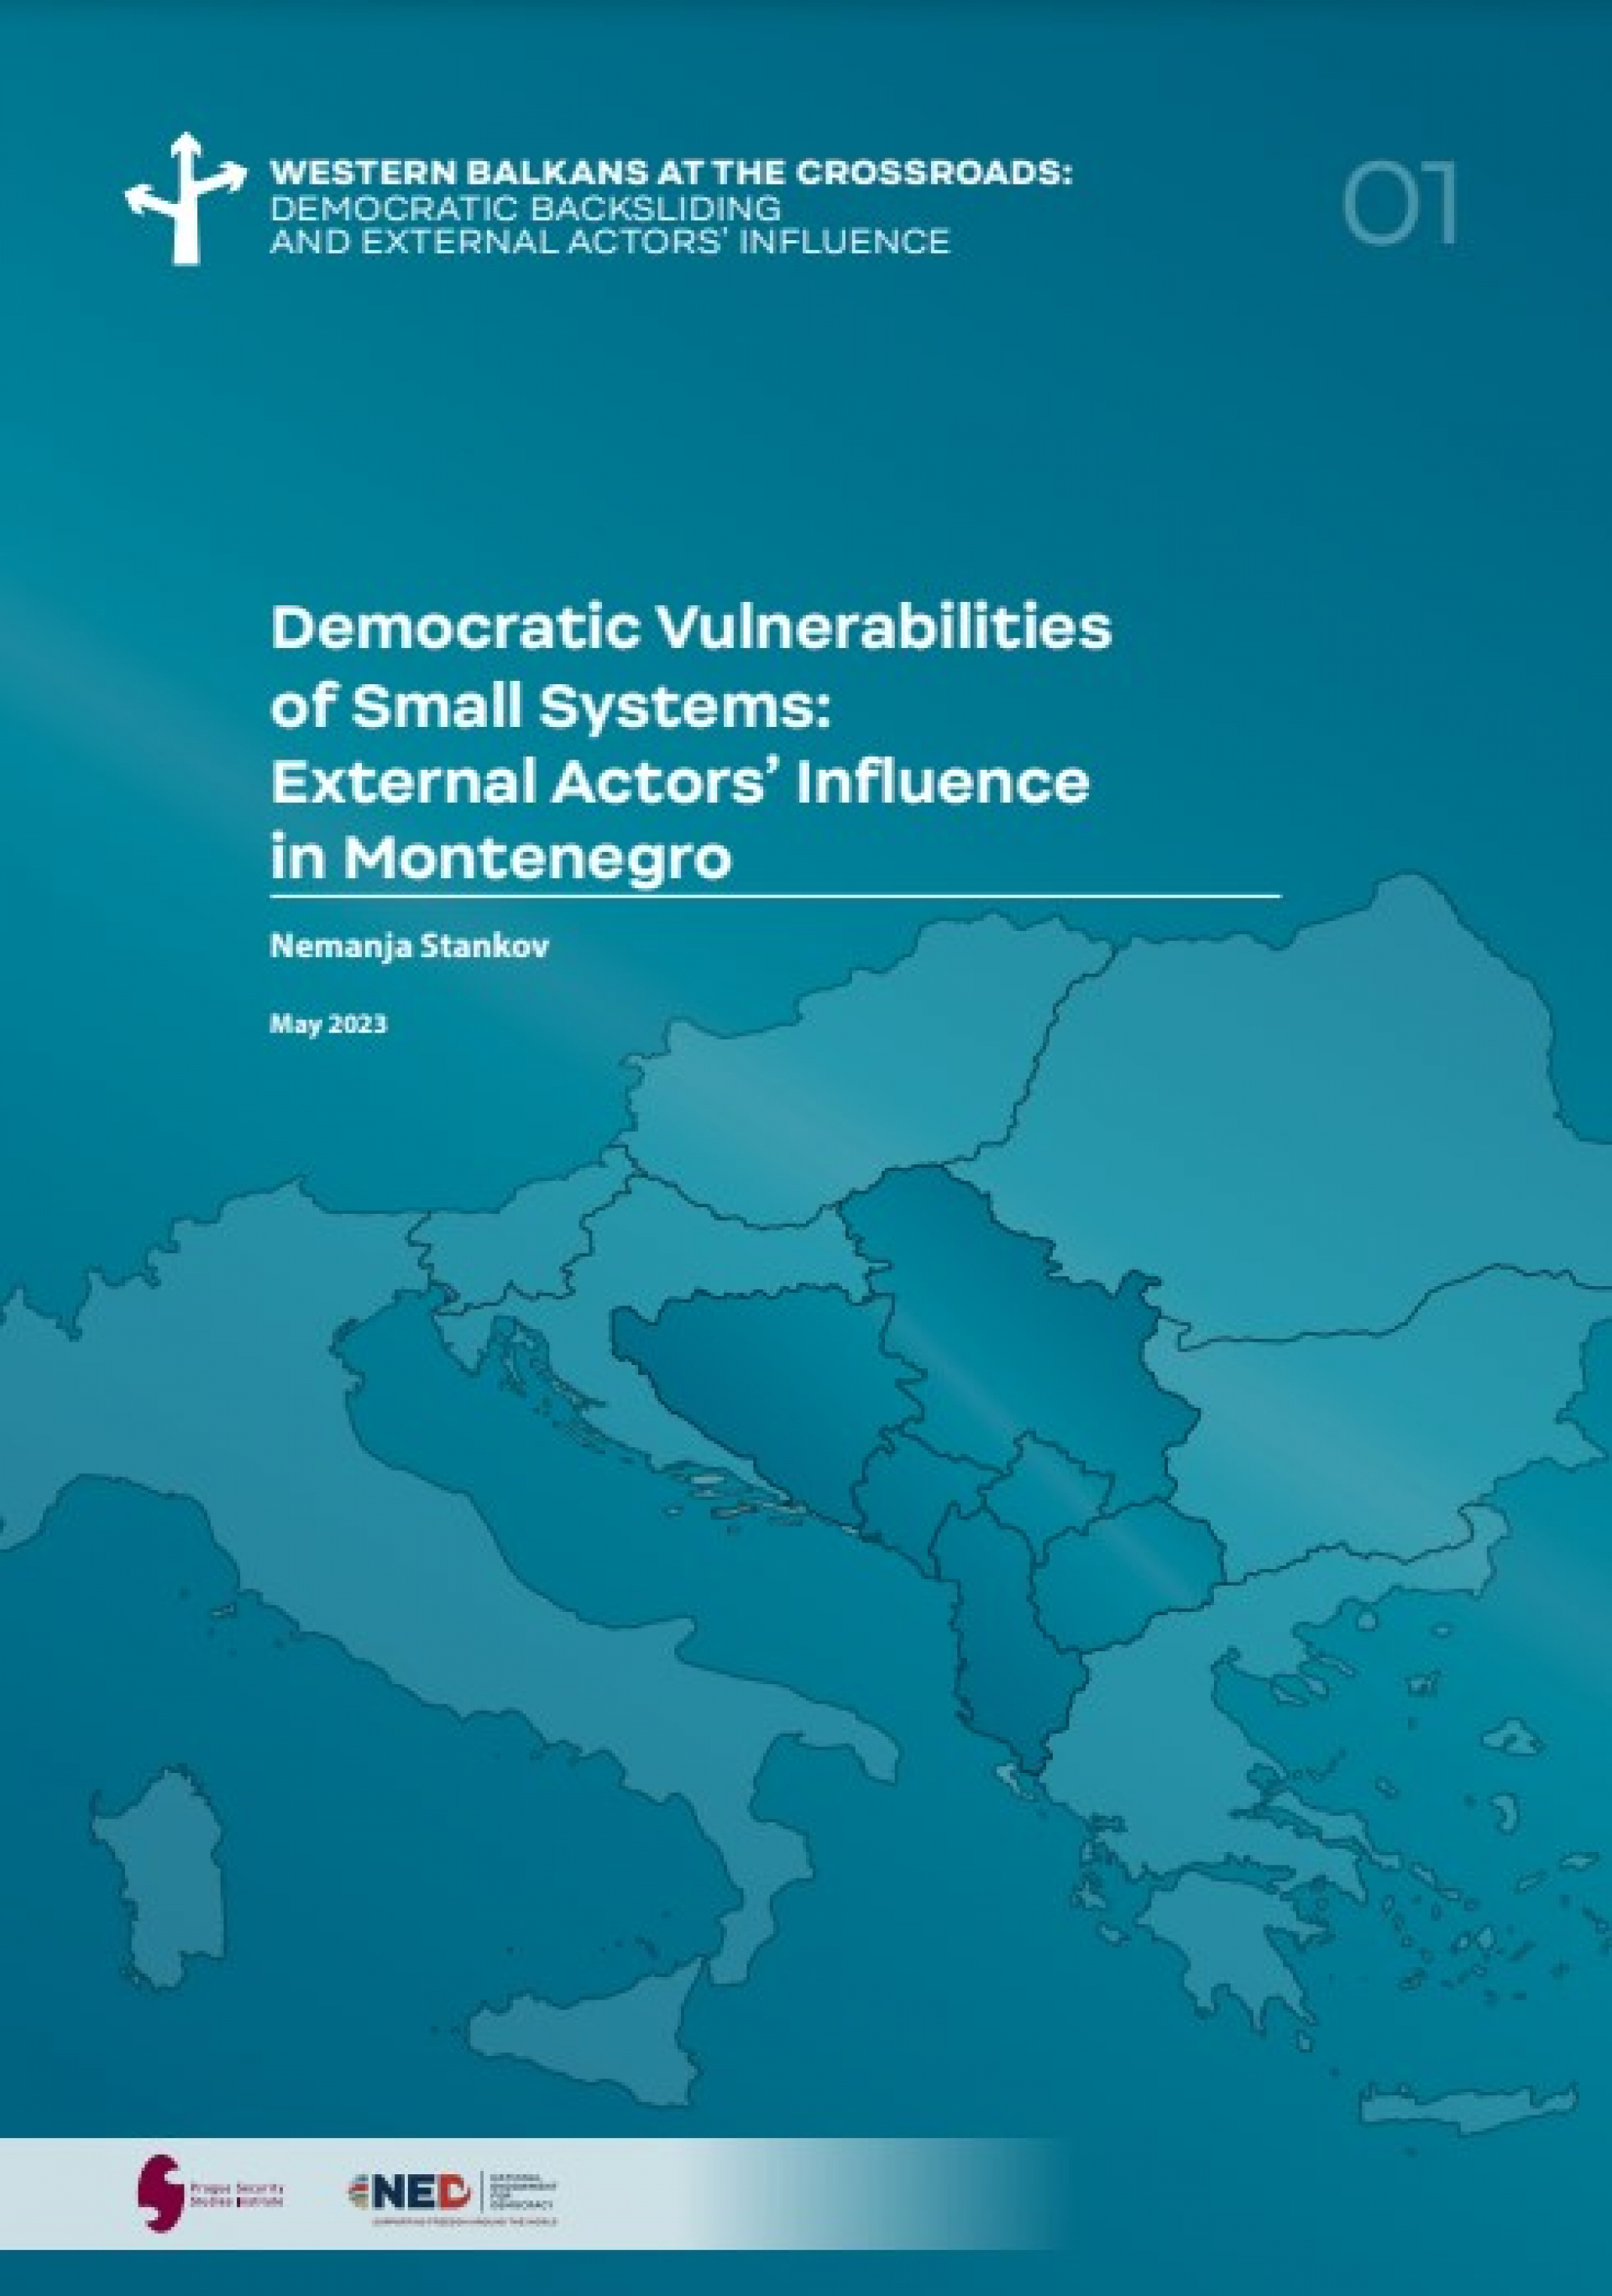 Democratic Vulnerabilities of Small Systems